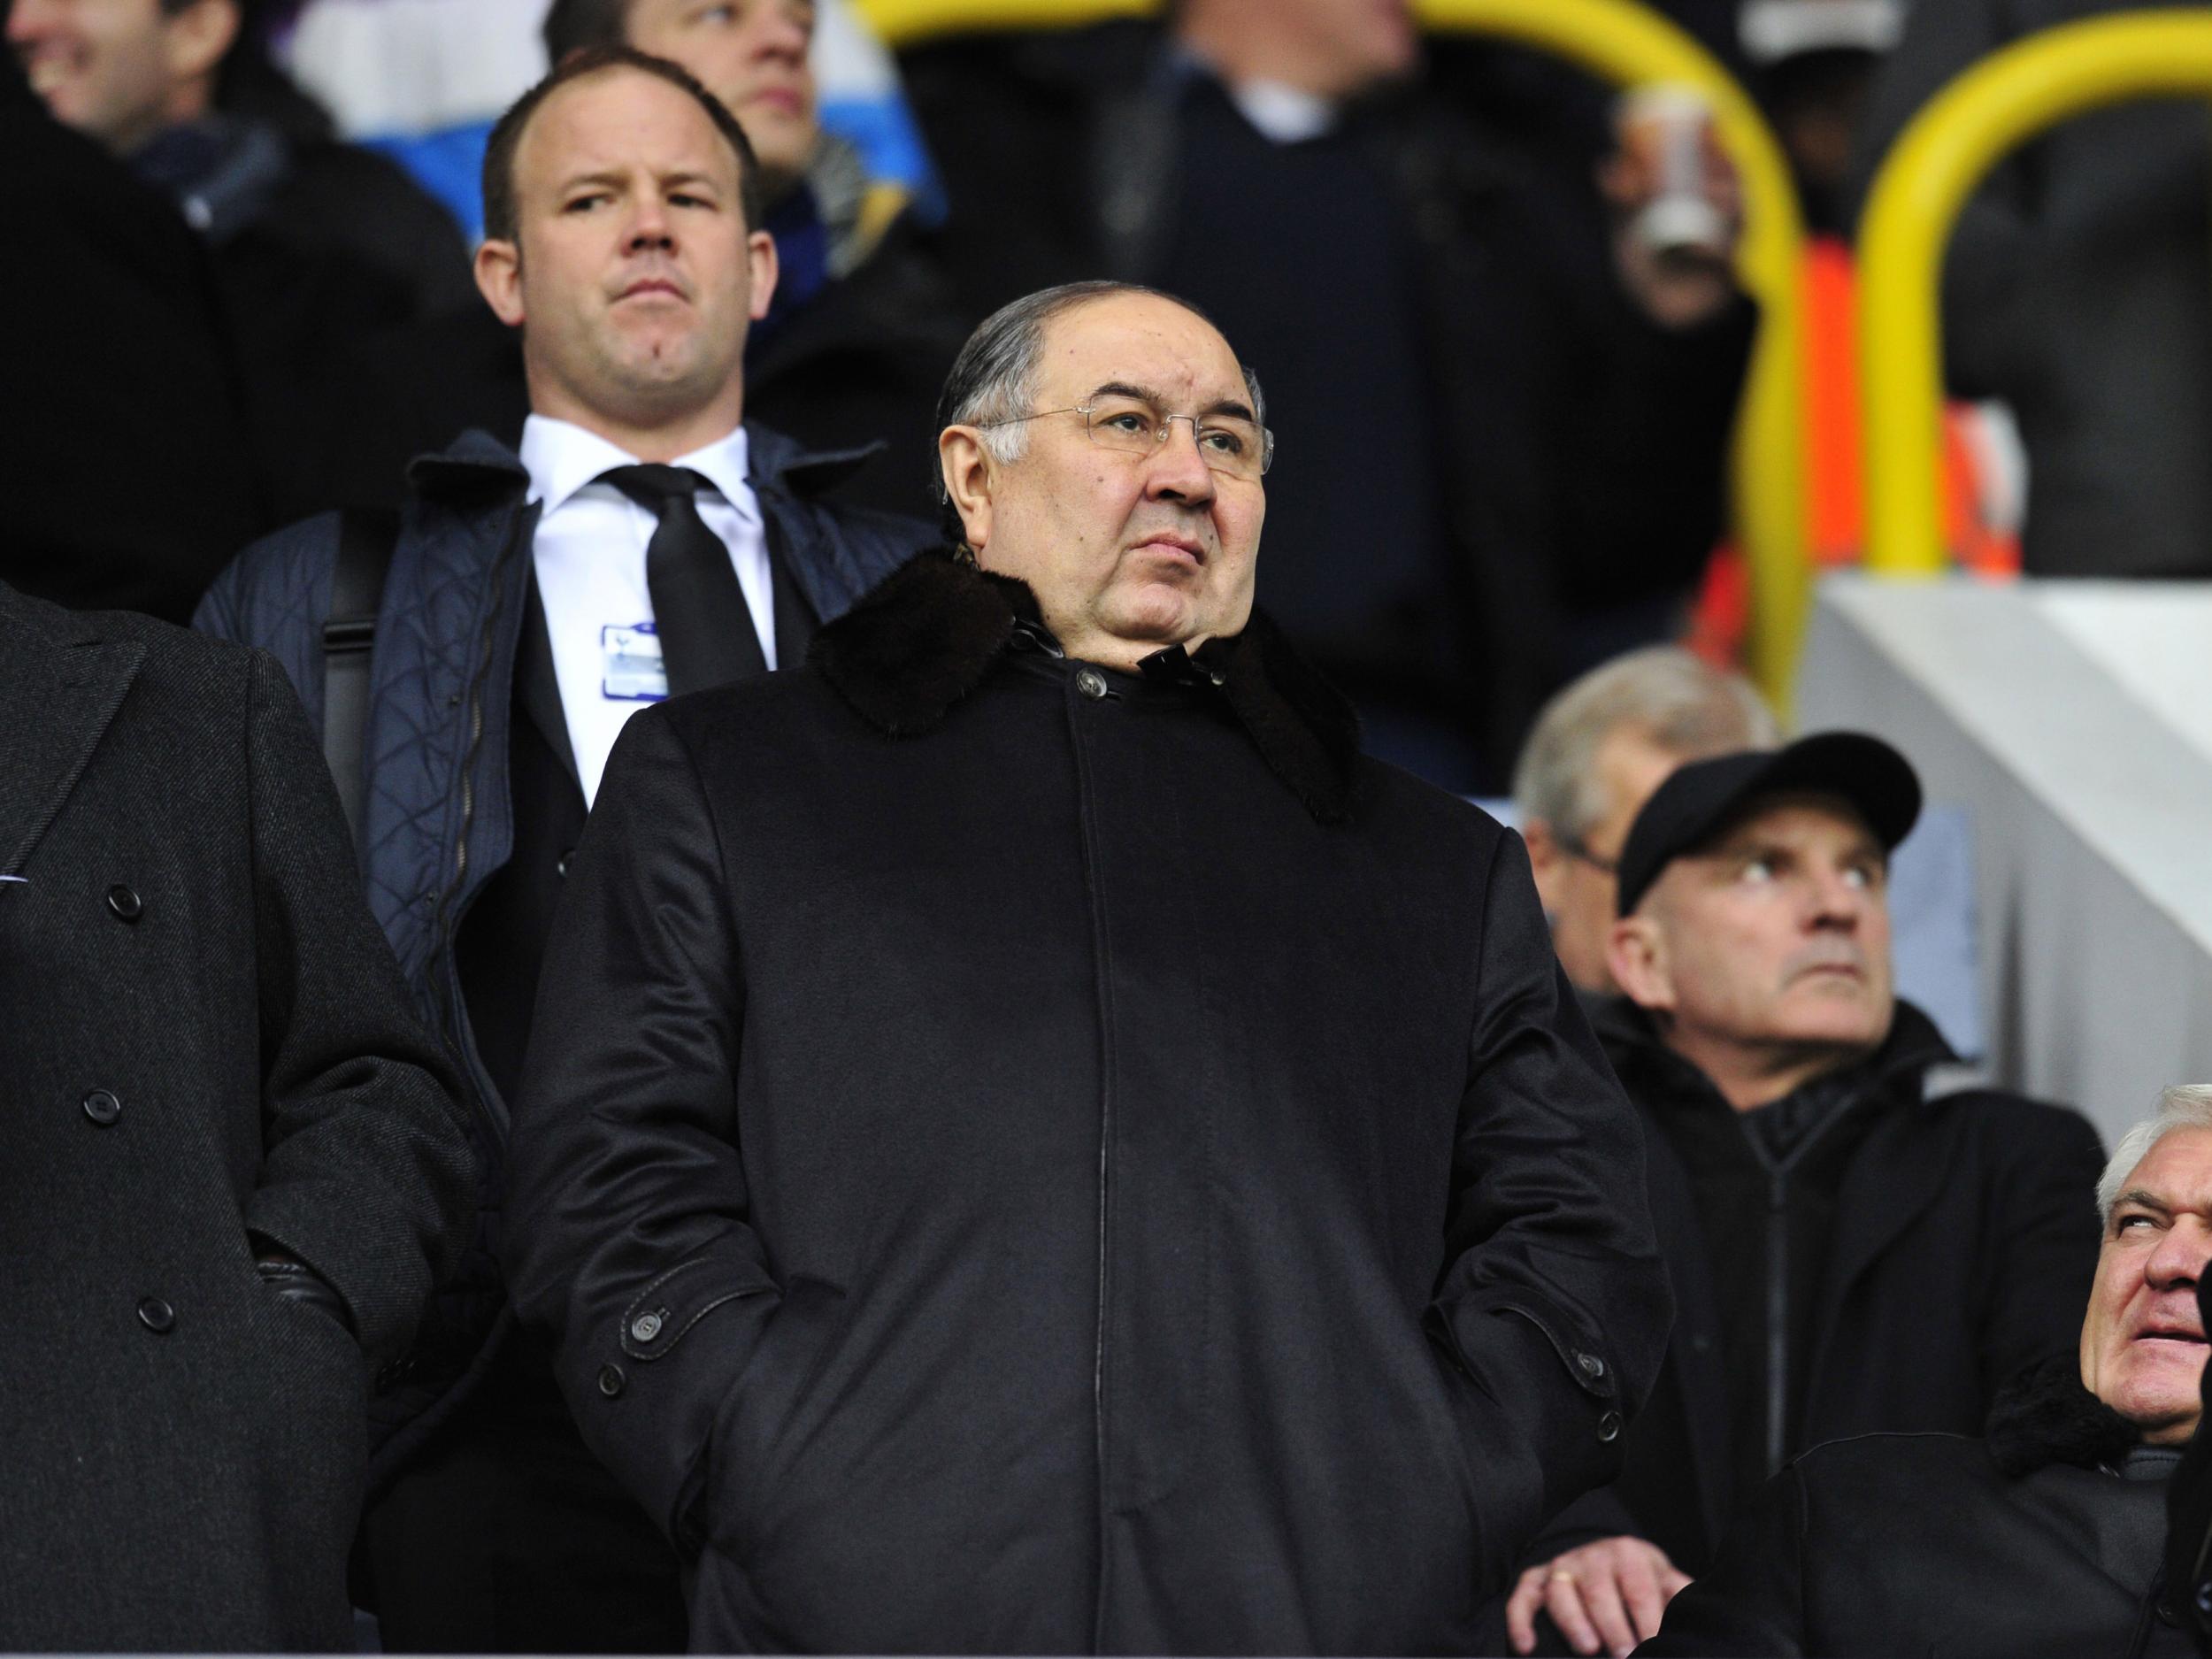 Usmanov has agreed to sell his 30 per cent stake in the club